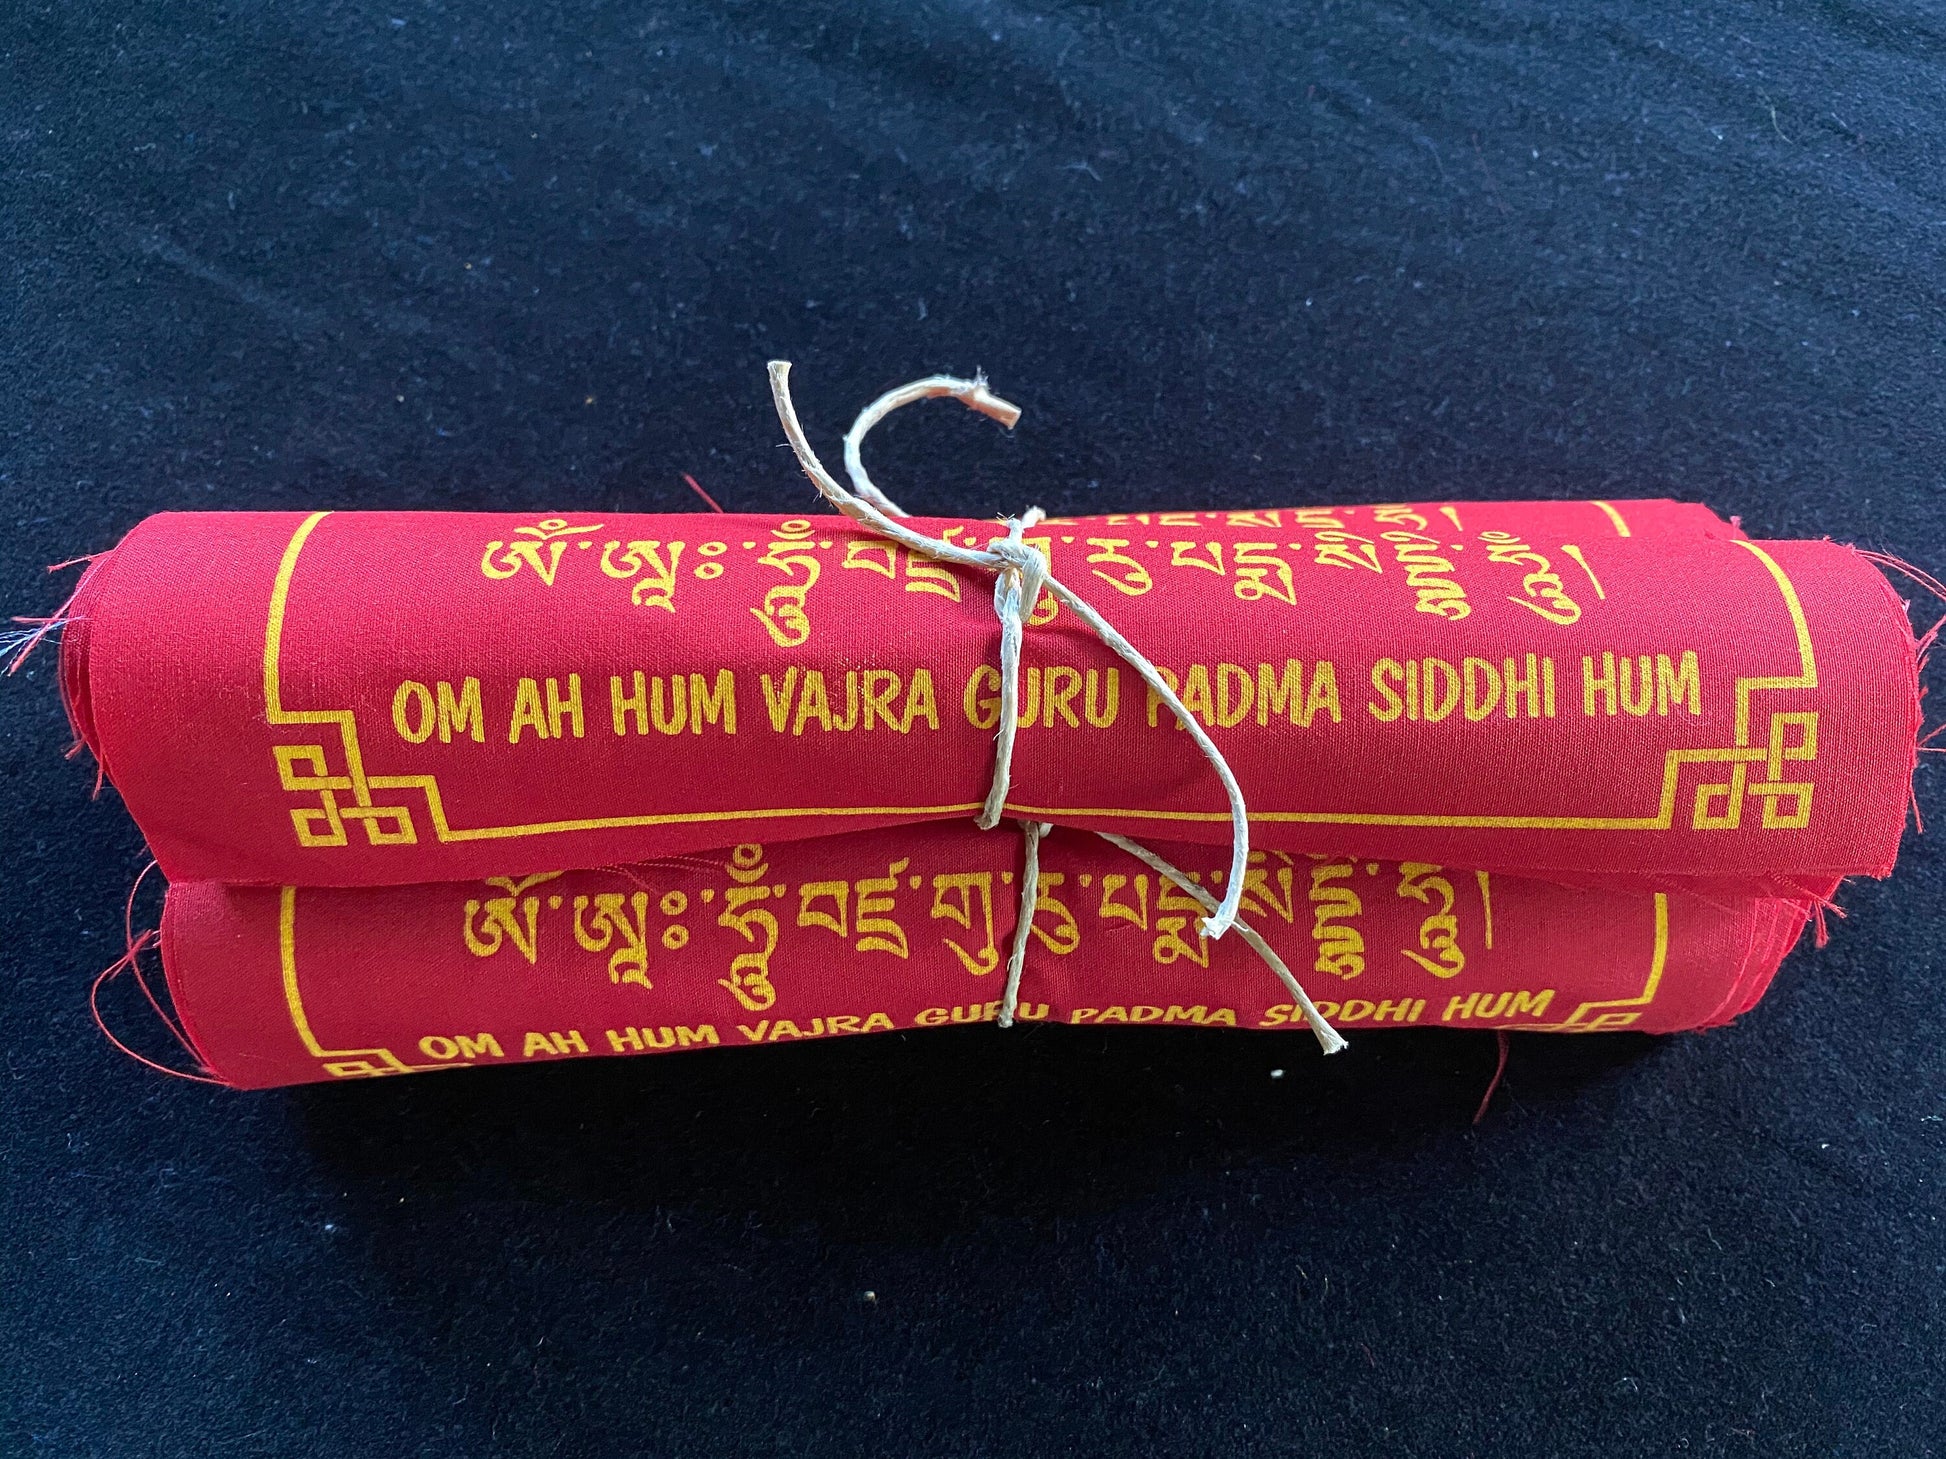 High-quality Tibetan prayer flags: Close-up of 3 rolls of 10 Guru Rinpoche flag sets, 8x8 inches, colored red, imprinted with his image in yellow ink on a black background.